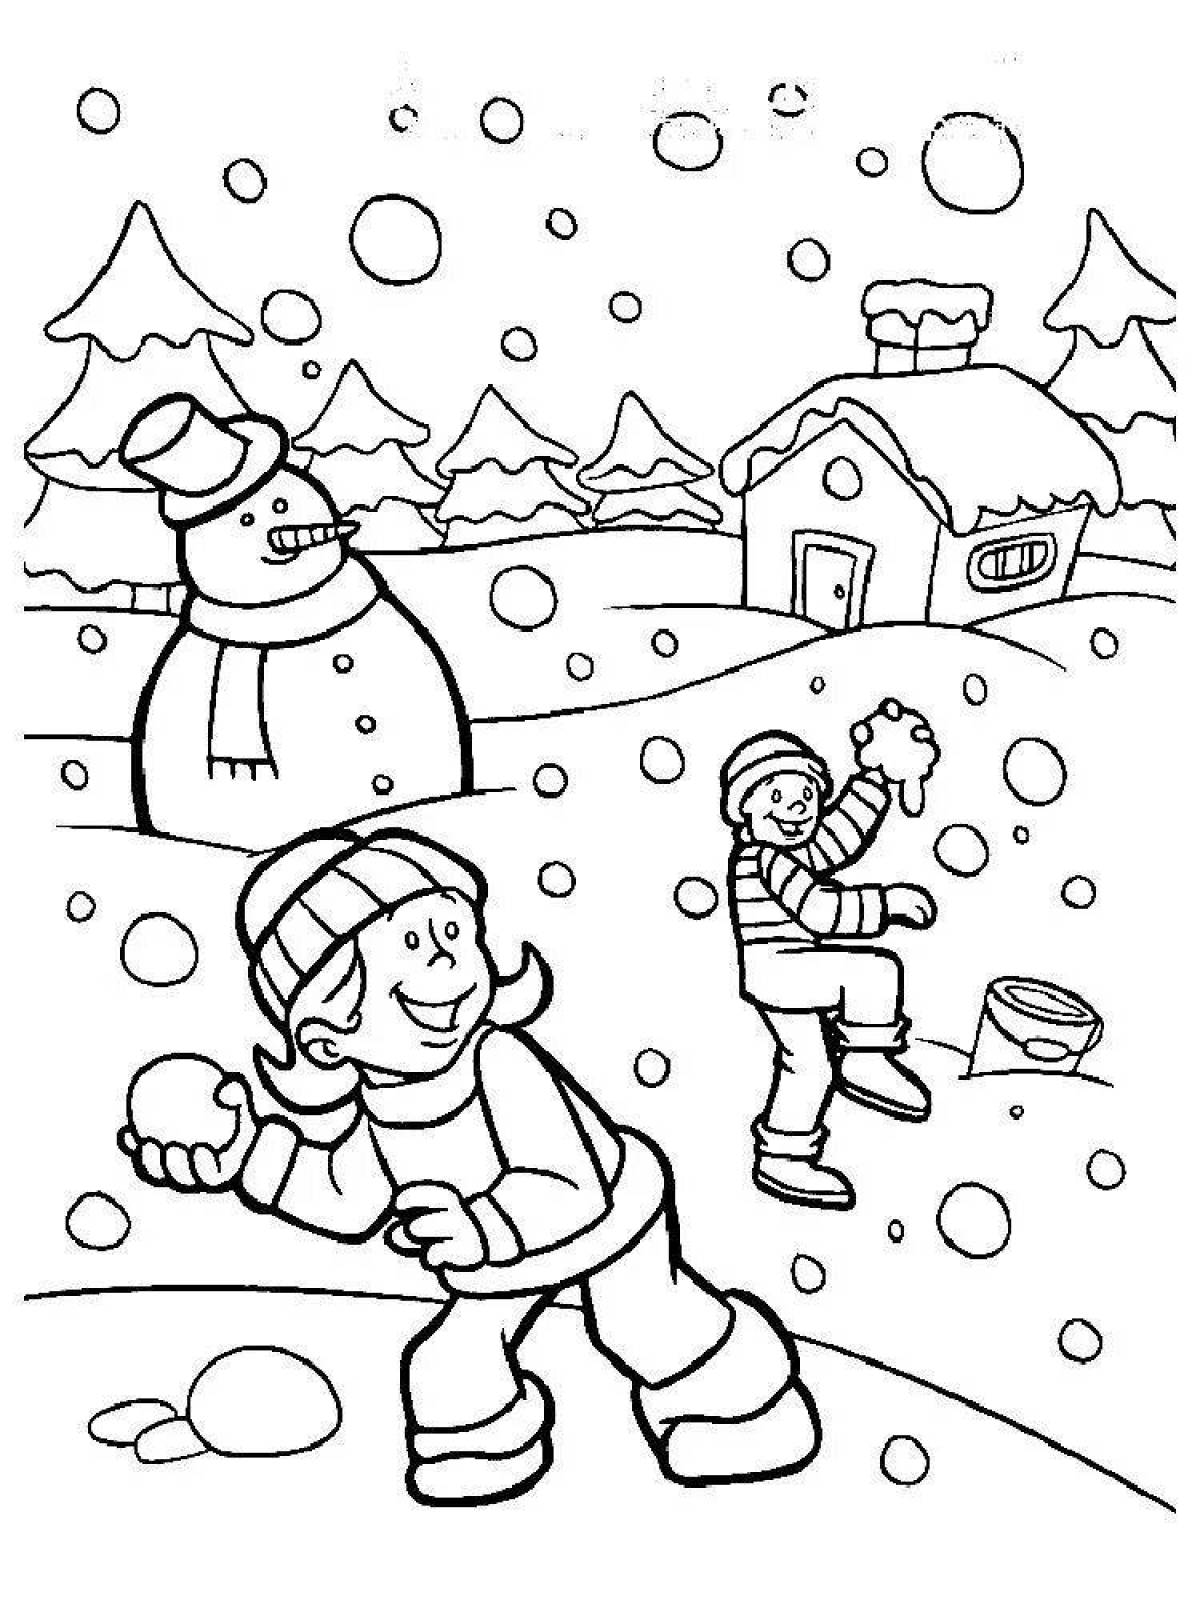 Funny coloring winter activities for children 5 years old